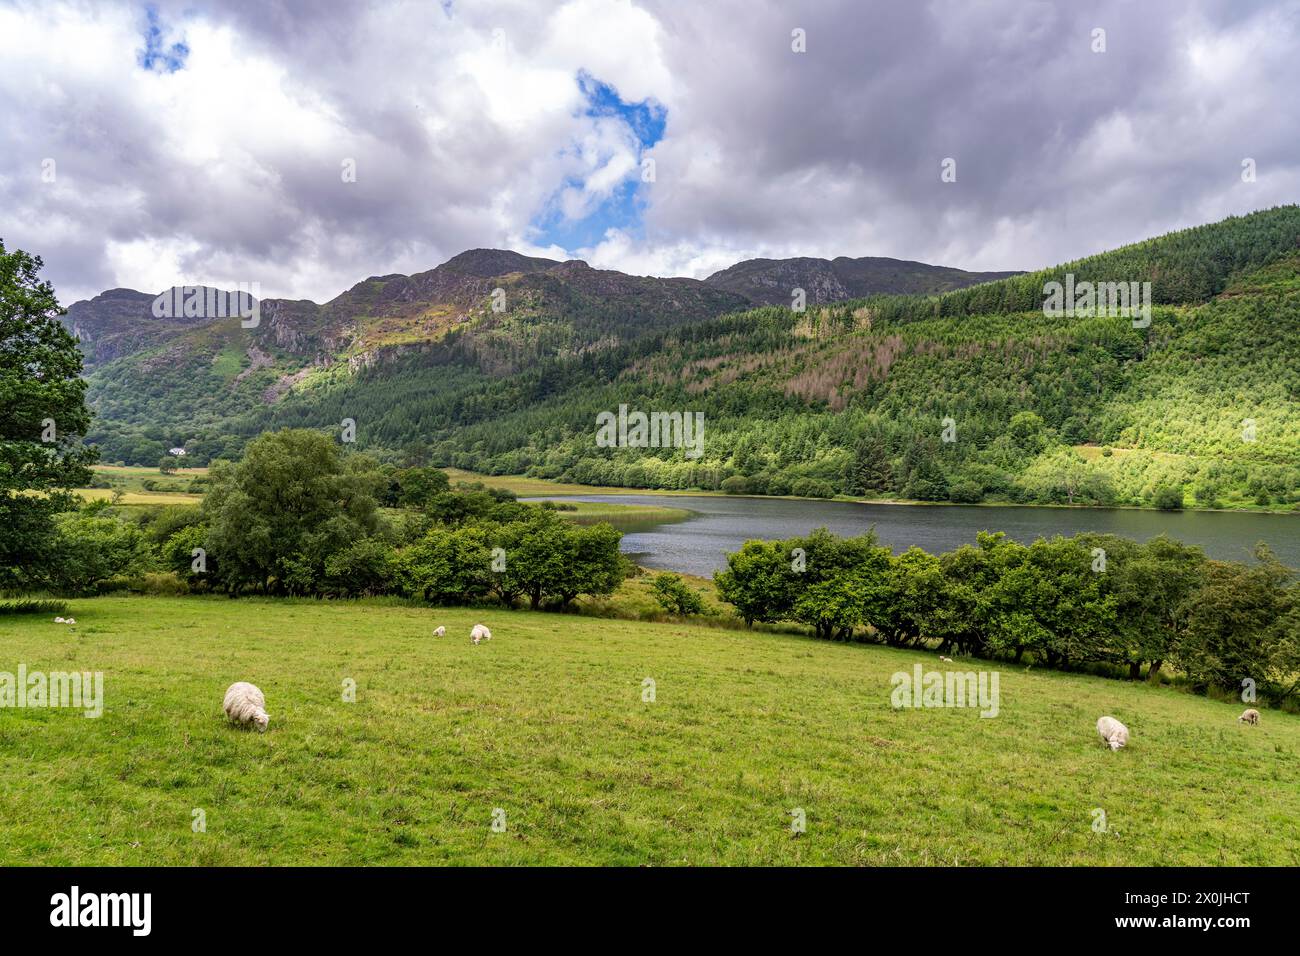 Sheep in the landscape at Lake Llyn Geirionydd, Snowdonia National Park, Wales, Great Britain, Europe Stock Photo